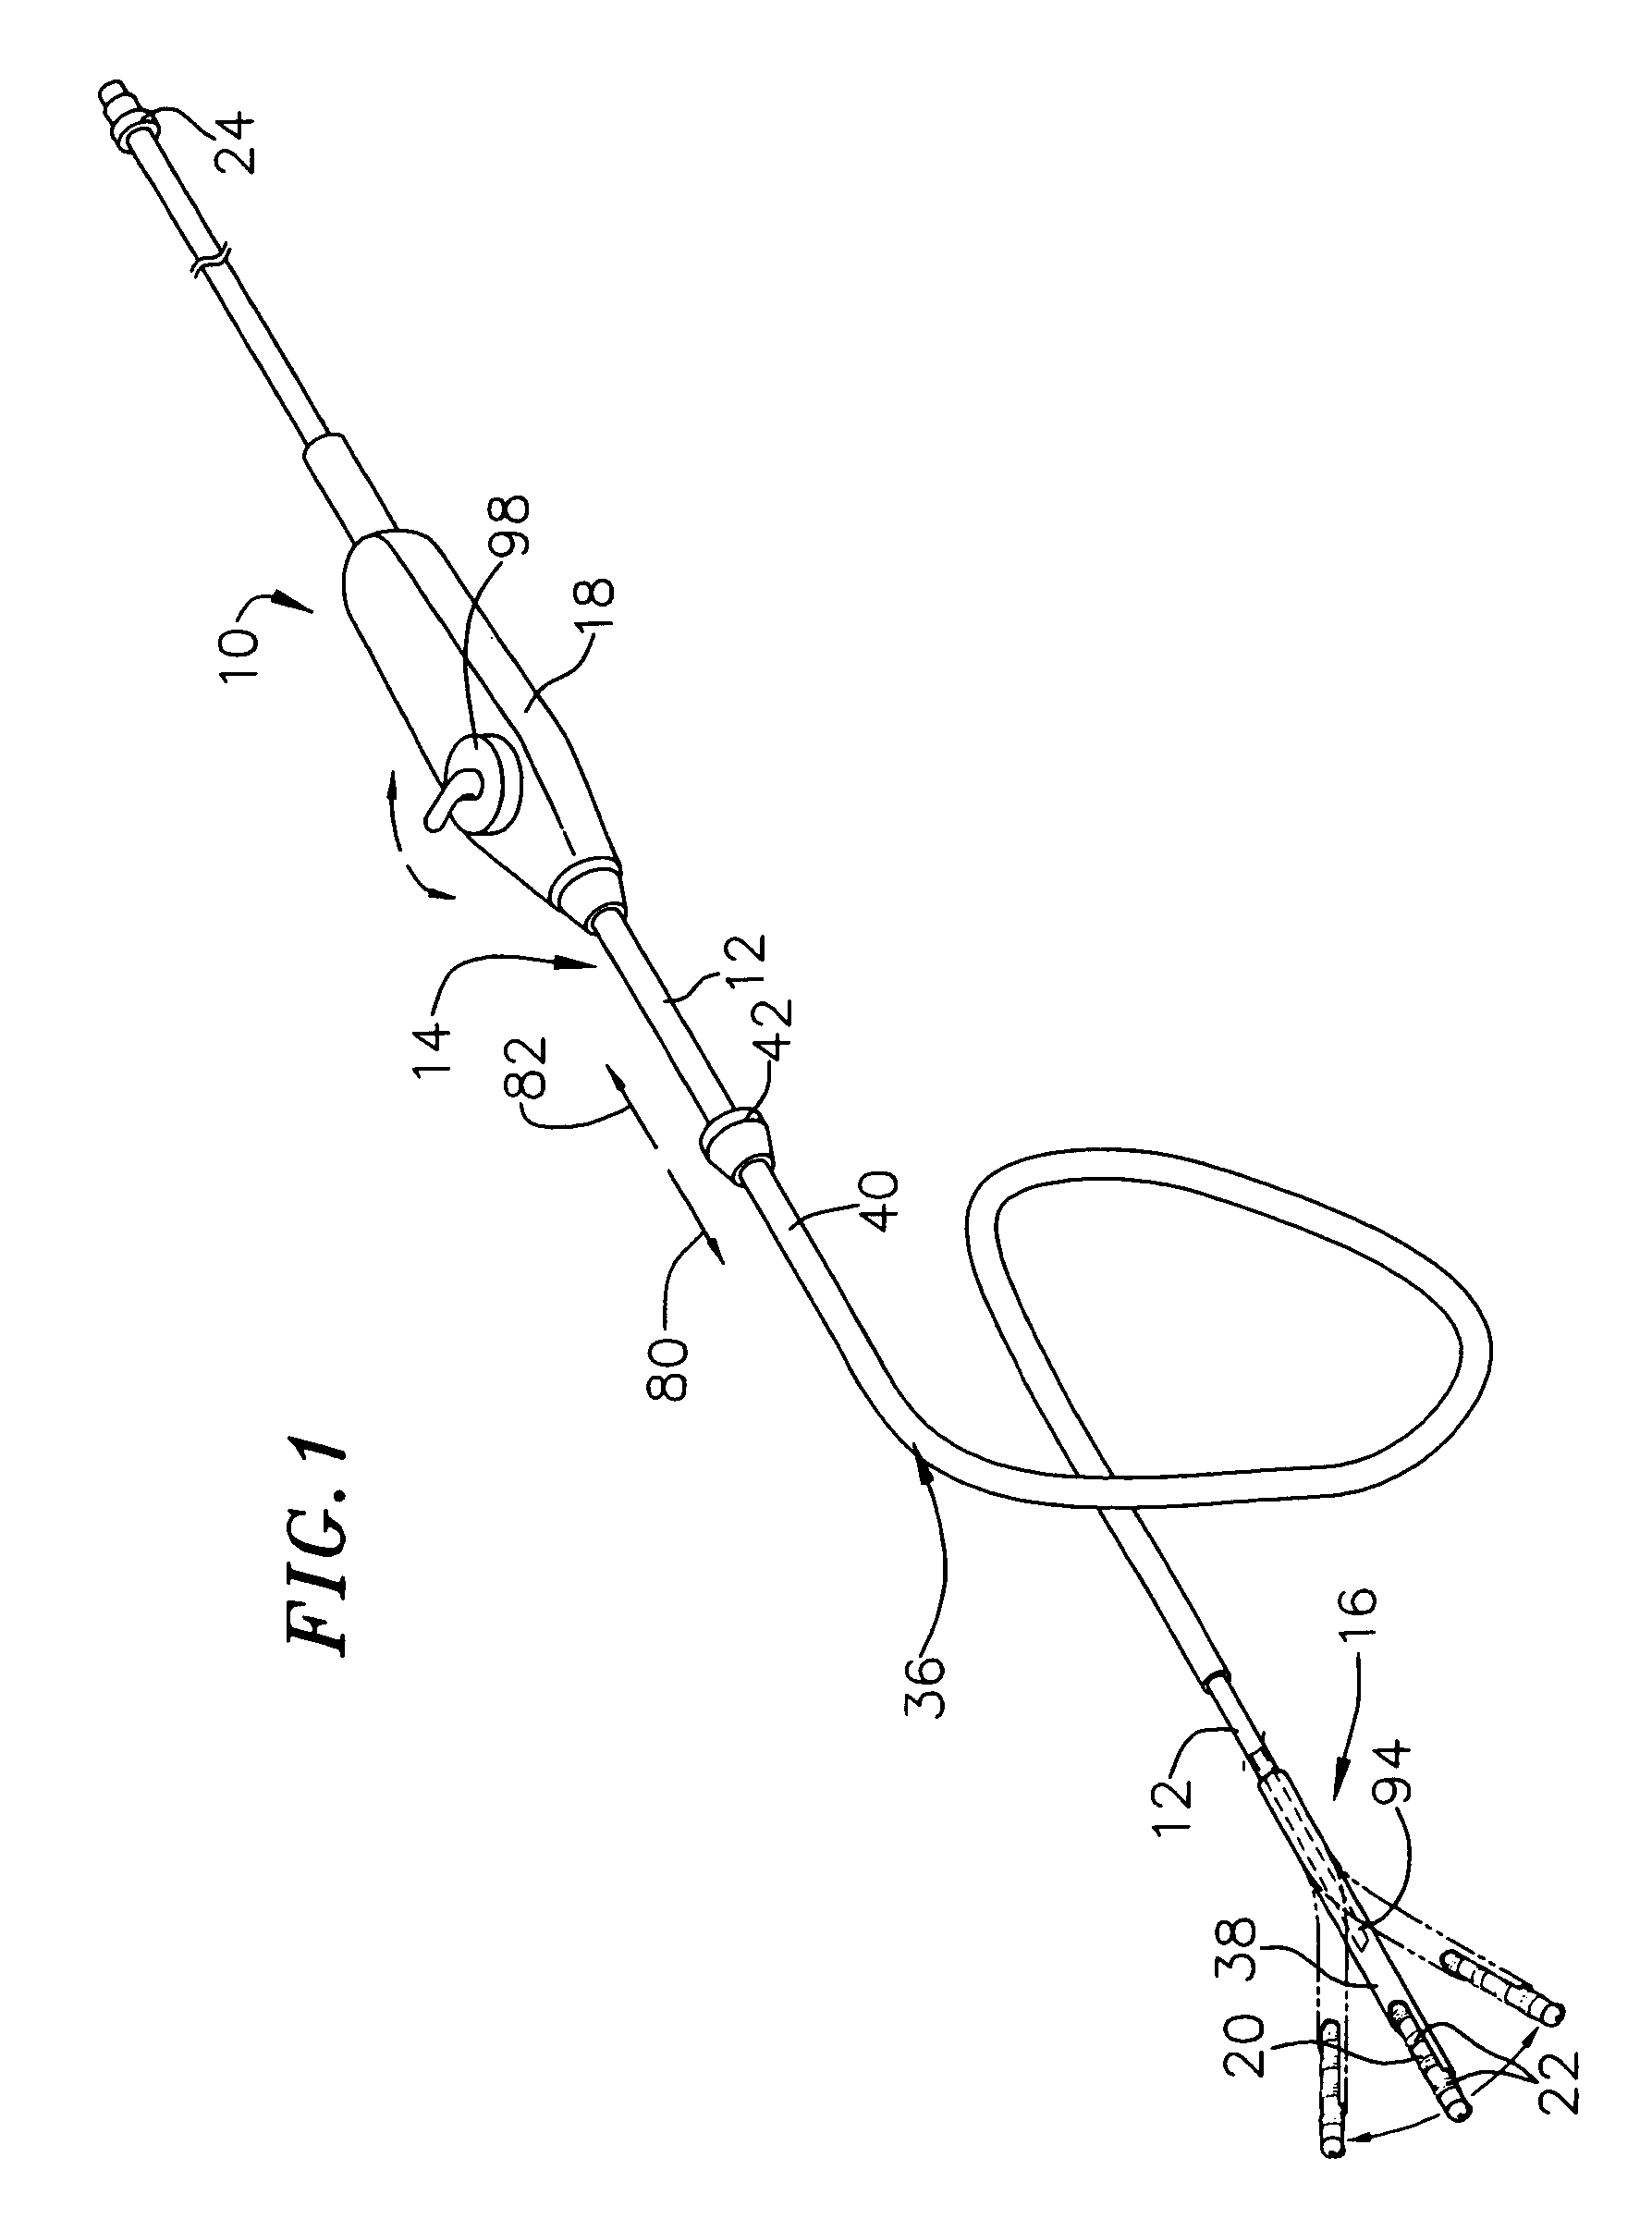 Catheter distal assembly with pull wires